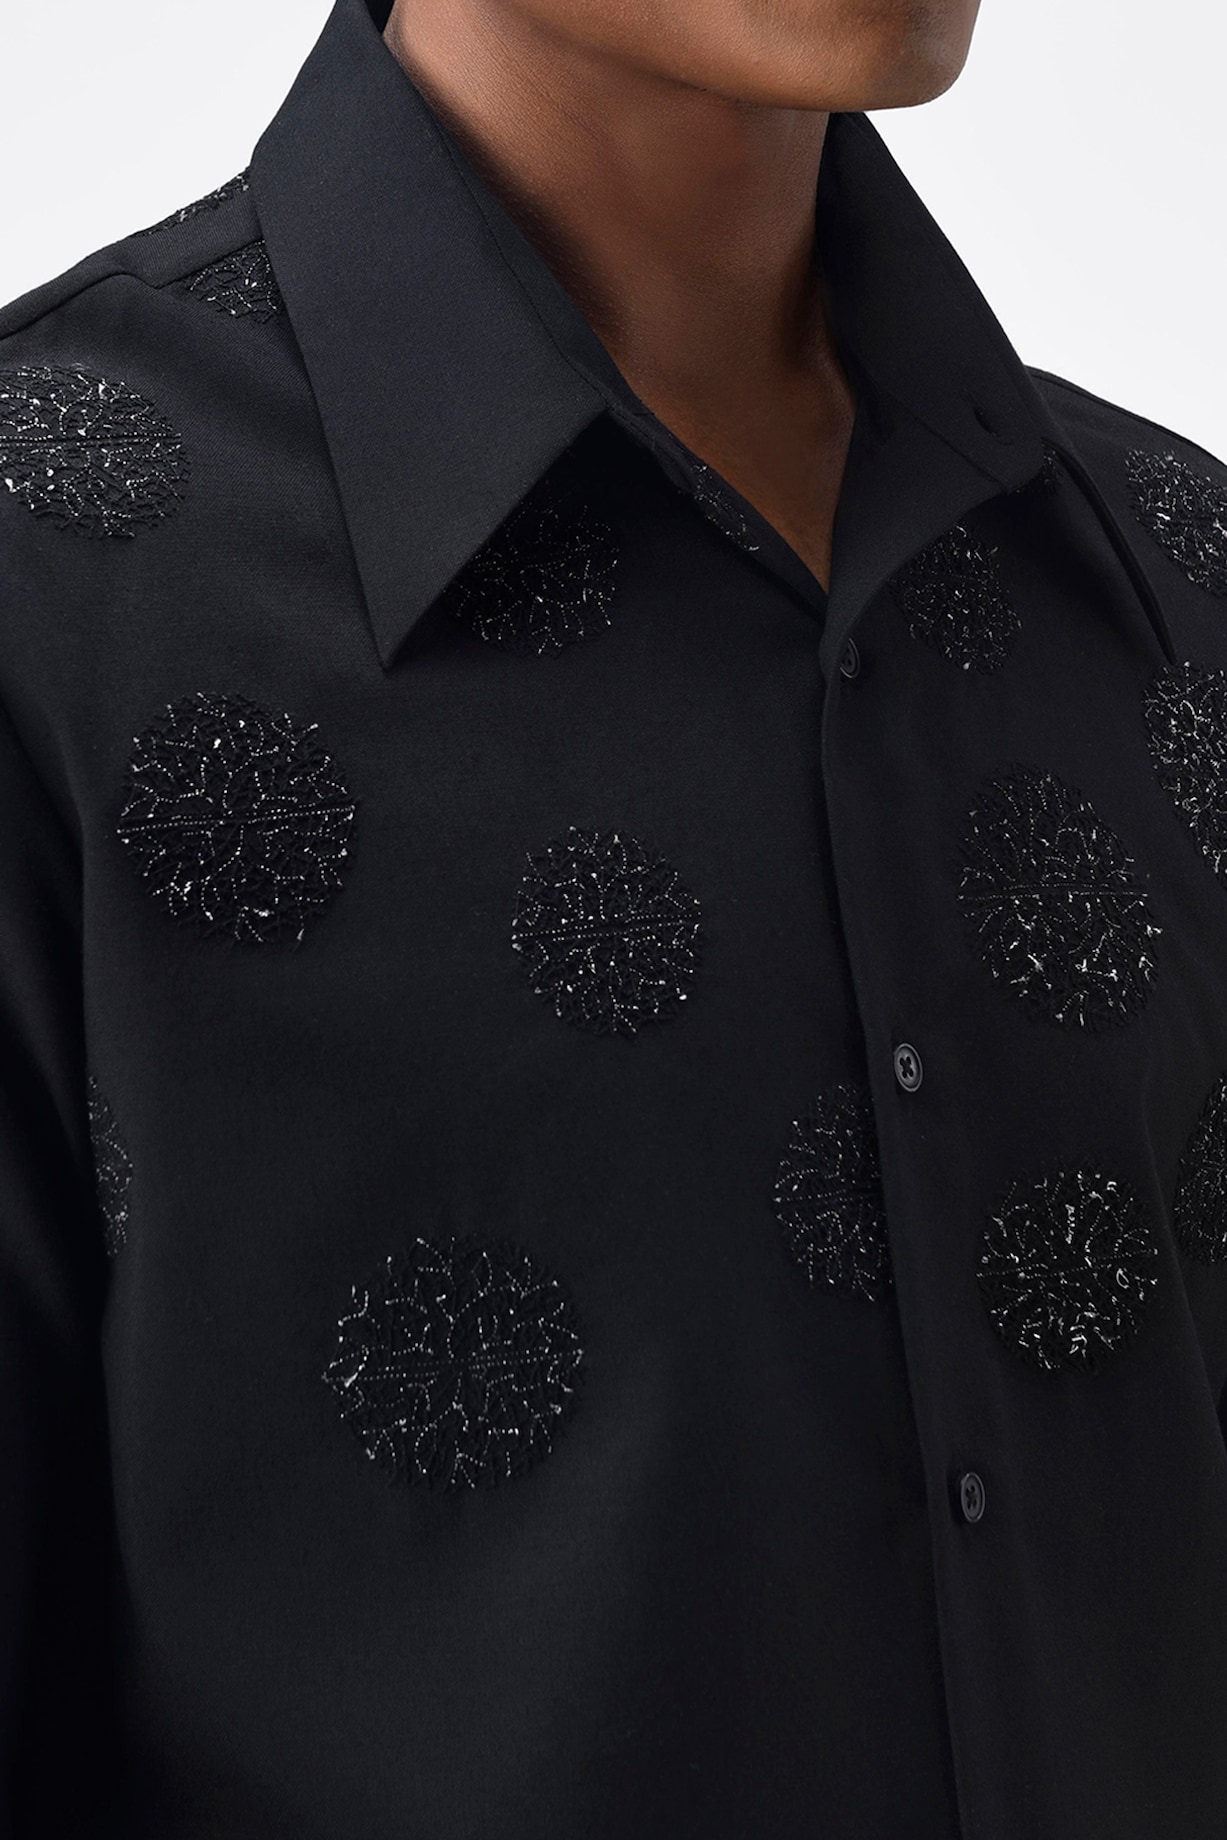 Black Embroidered Shirt by Genes Lecoanet Hemant Men